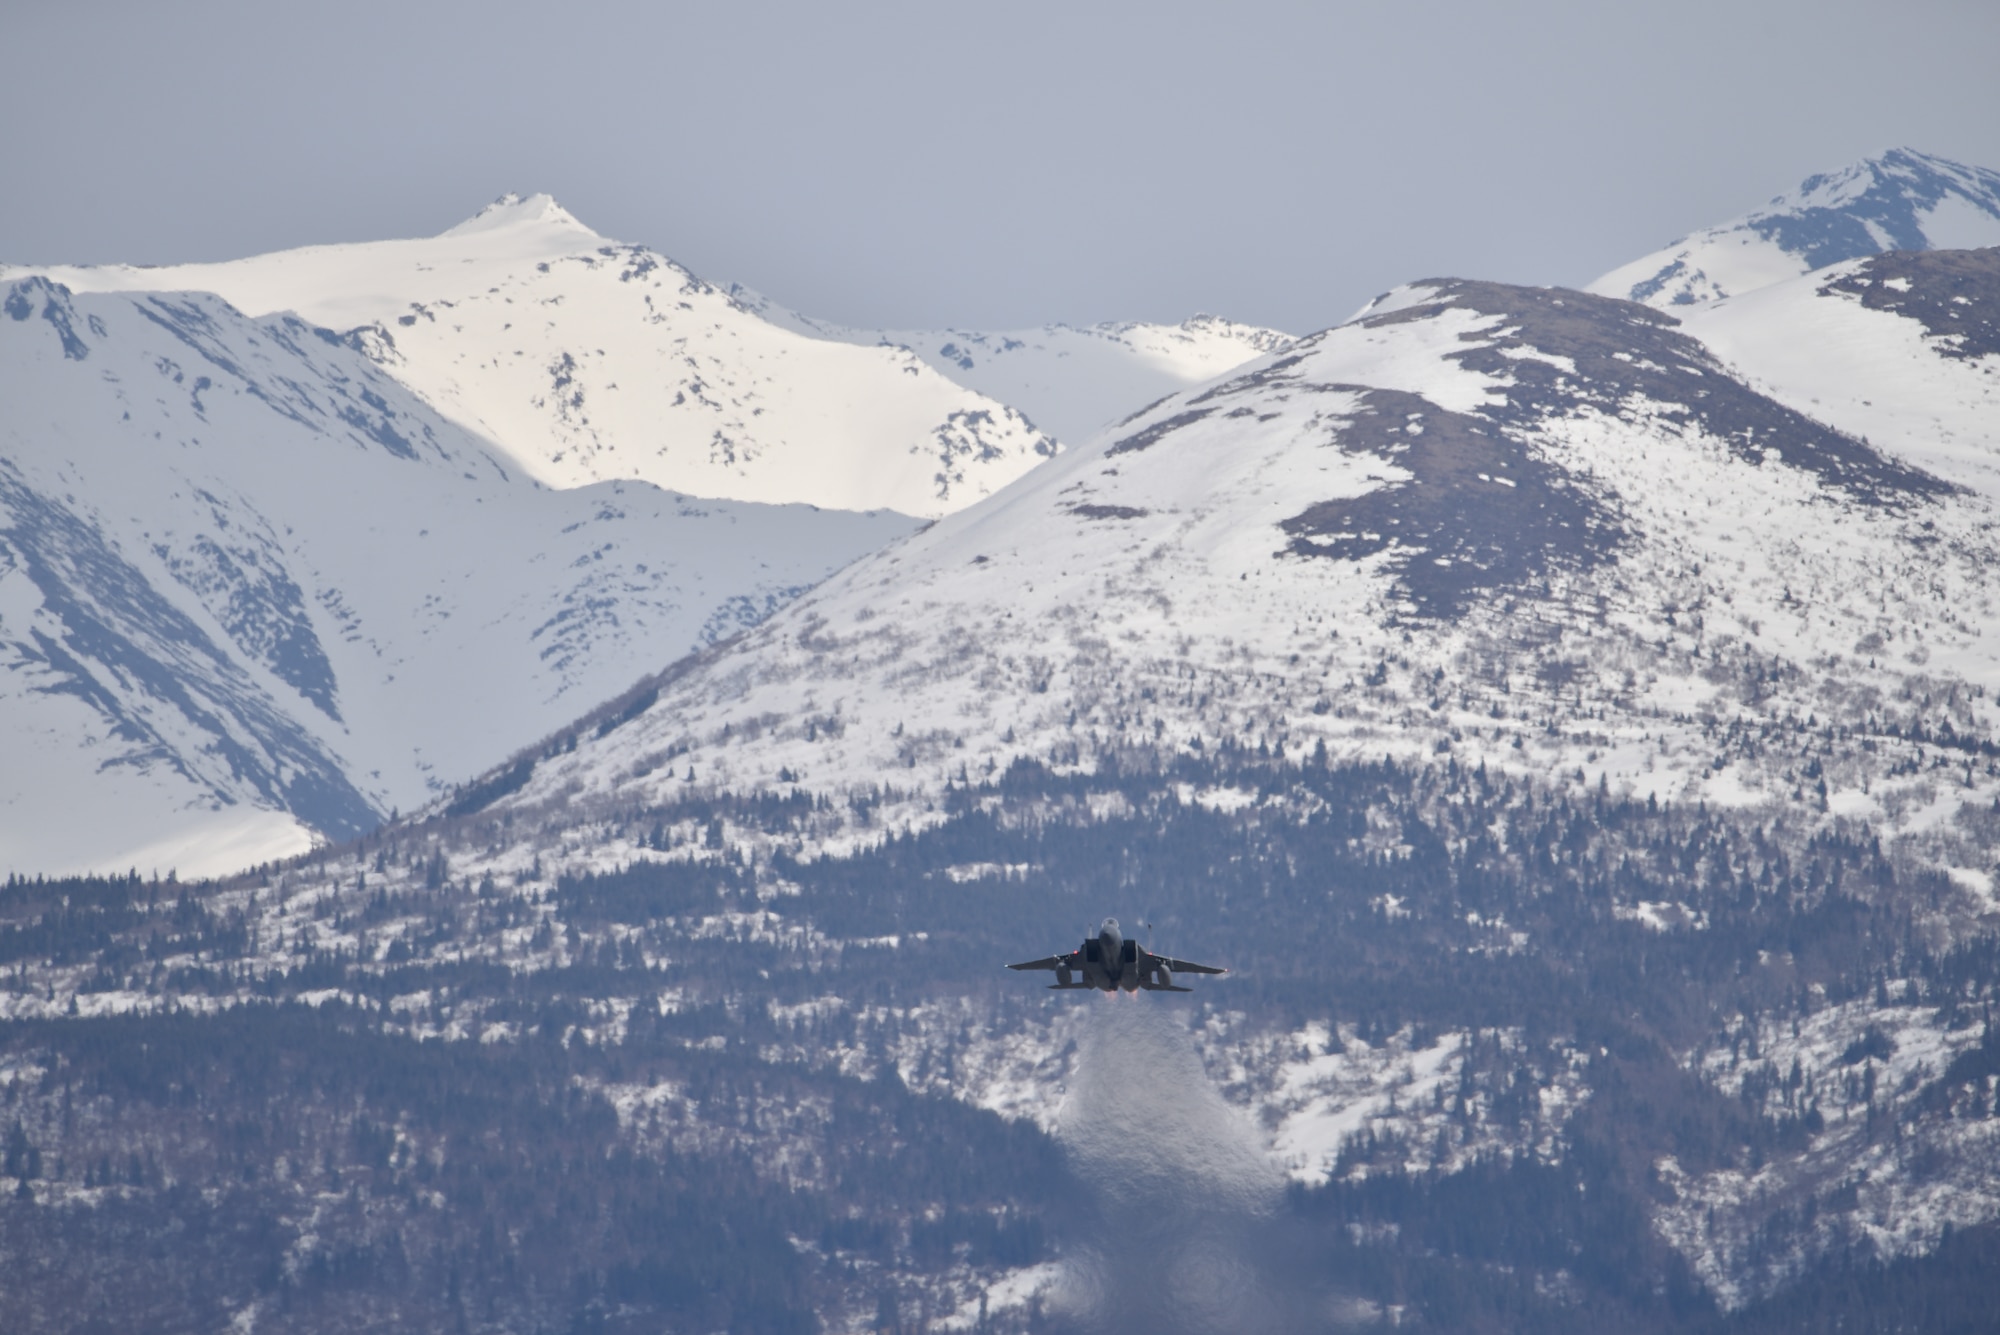 An F-15C Eagle fighter jet assigned to the California Air National Guard’s 144th Fighter Wing takes off Joint Base Elmendorf-Richardson, Alaska, April 20, 2022, while conducting dissimilar air combat training with the 3rd Wing’s F-22 Raptors.